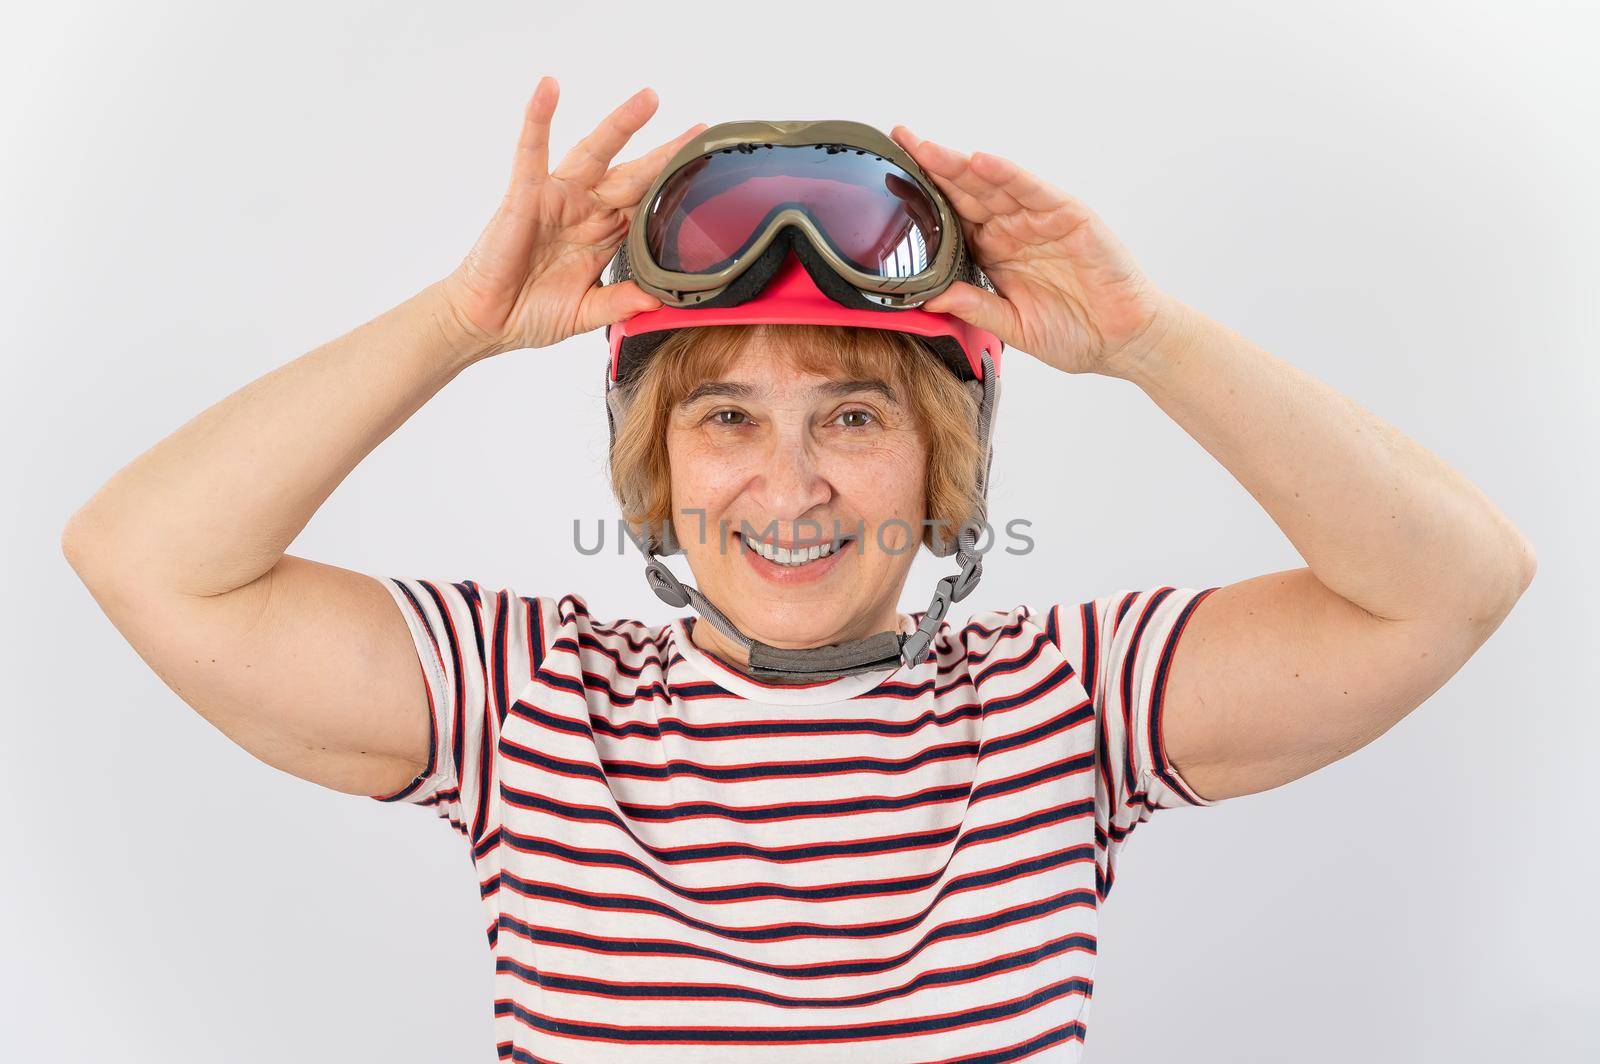 An elderly woman puts on a pink ski helmet on a white background by mrwed54